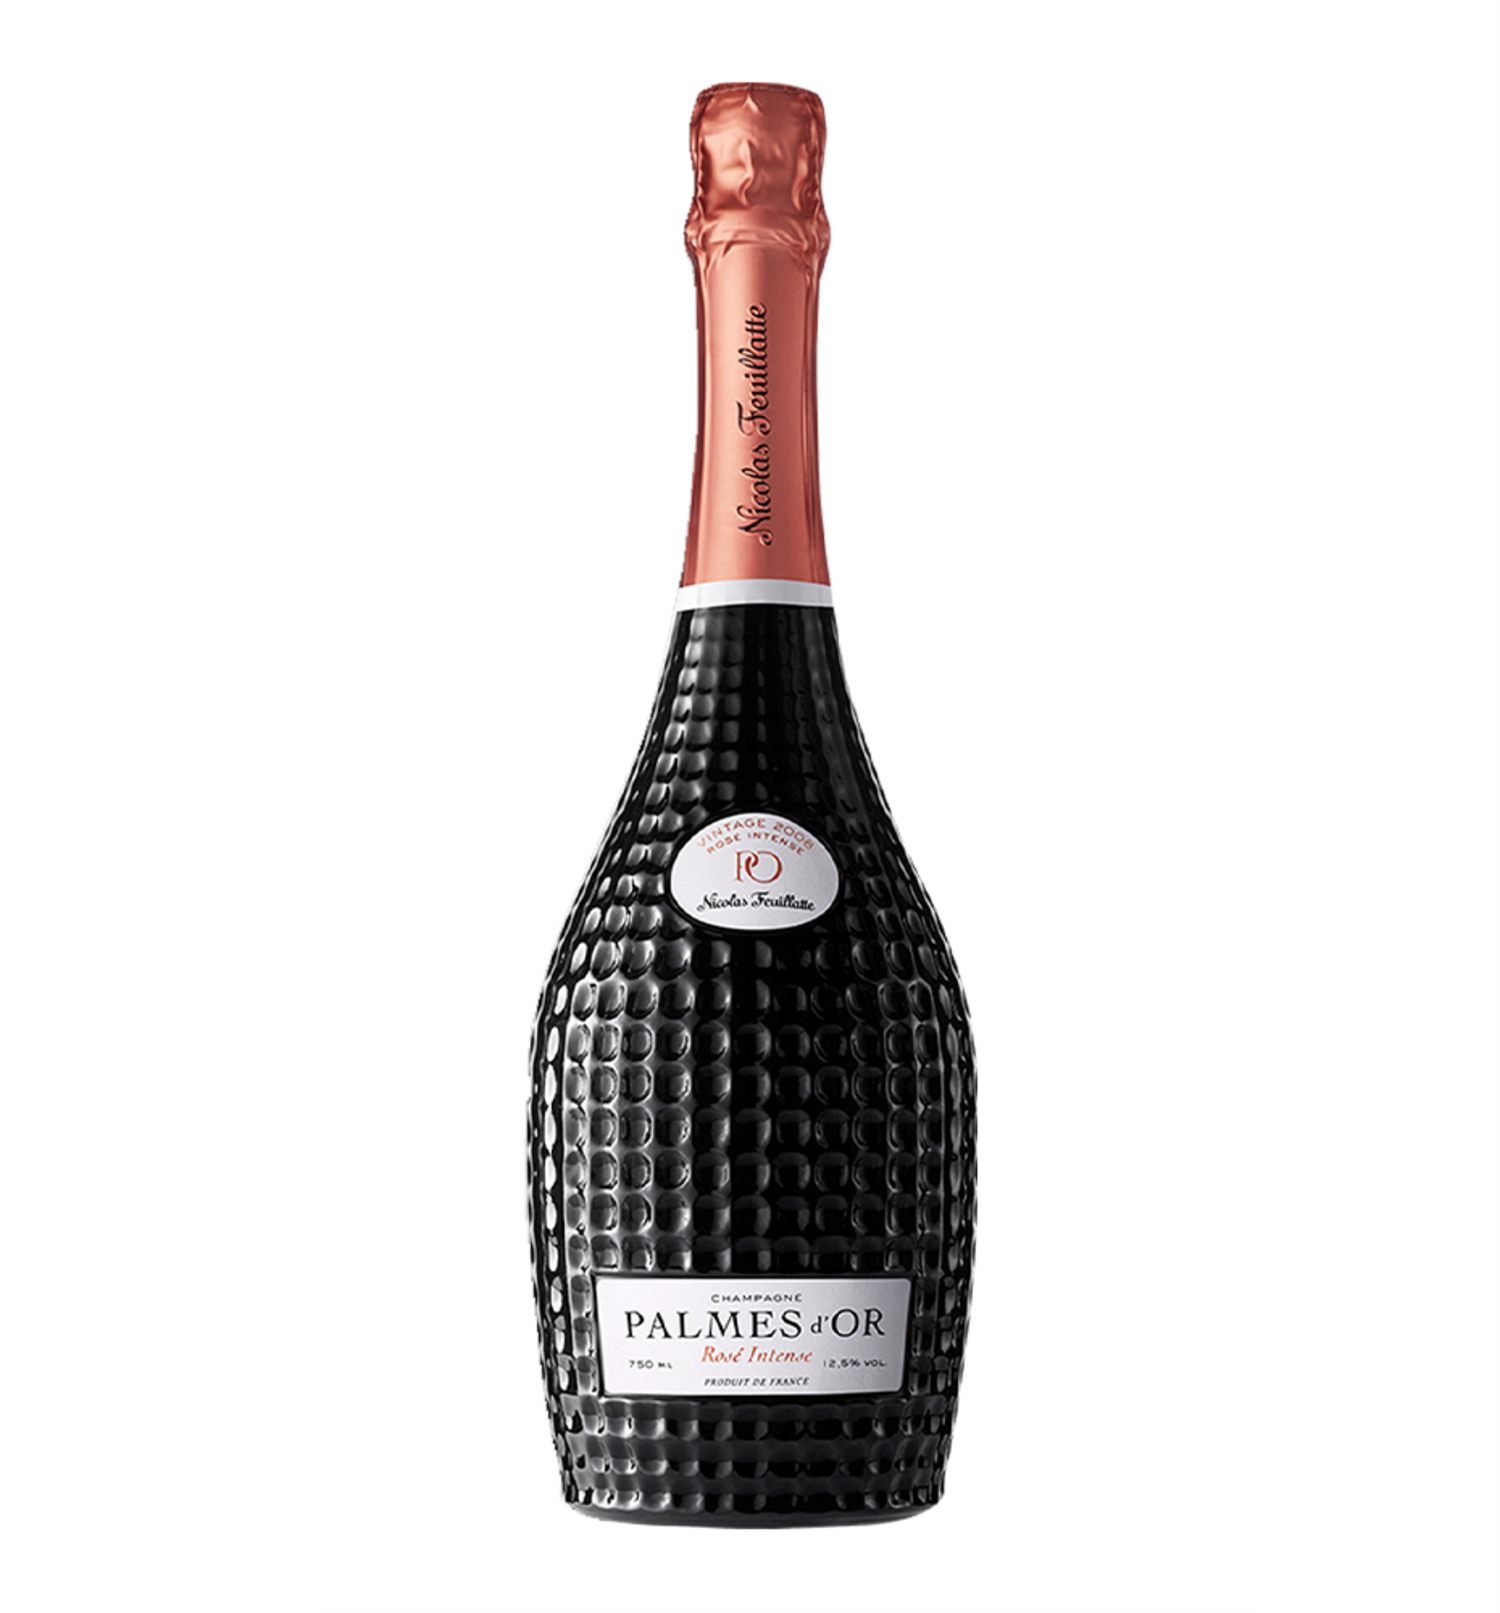 Nicolas Feuillatte Palmes Fossil D`or Vintage 750ml Rose - Wine&Spirits Champagne 2008 Uncle Intense